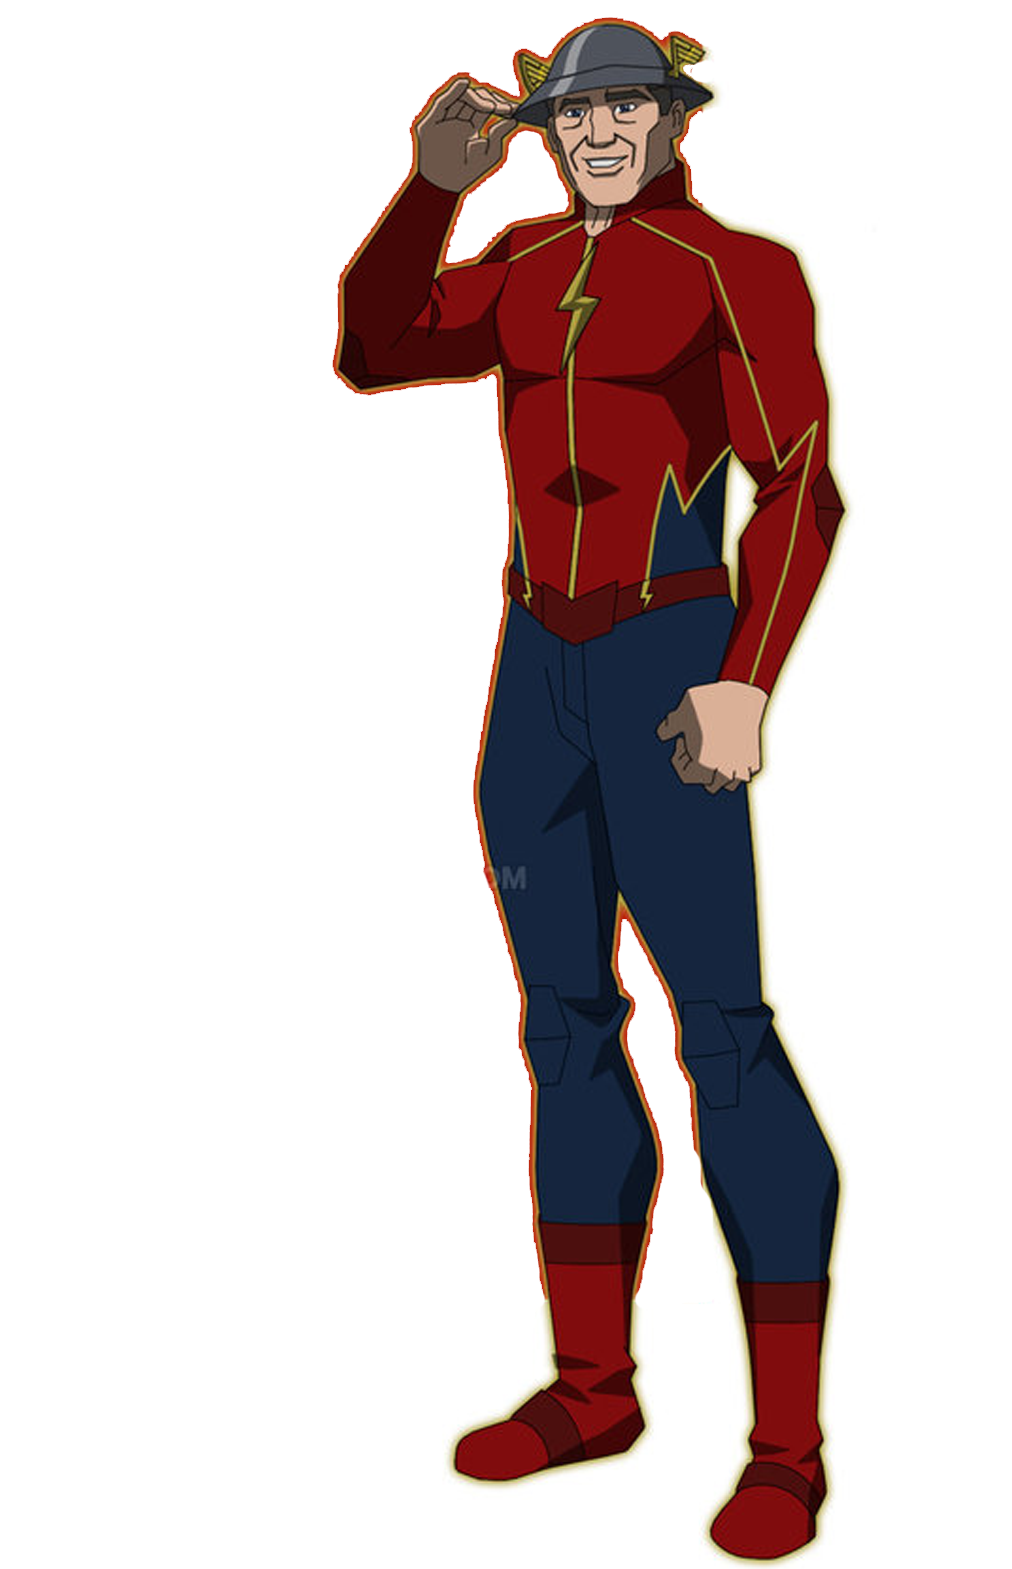 1140 X 1568 4 - Young Justice Jay Garrick (1140x1568)